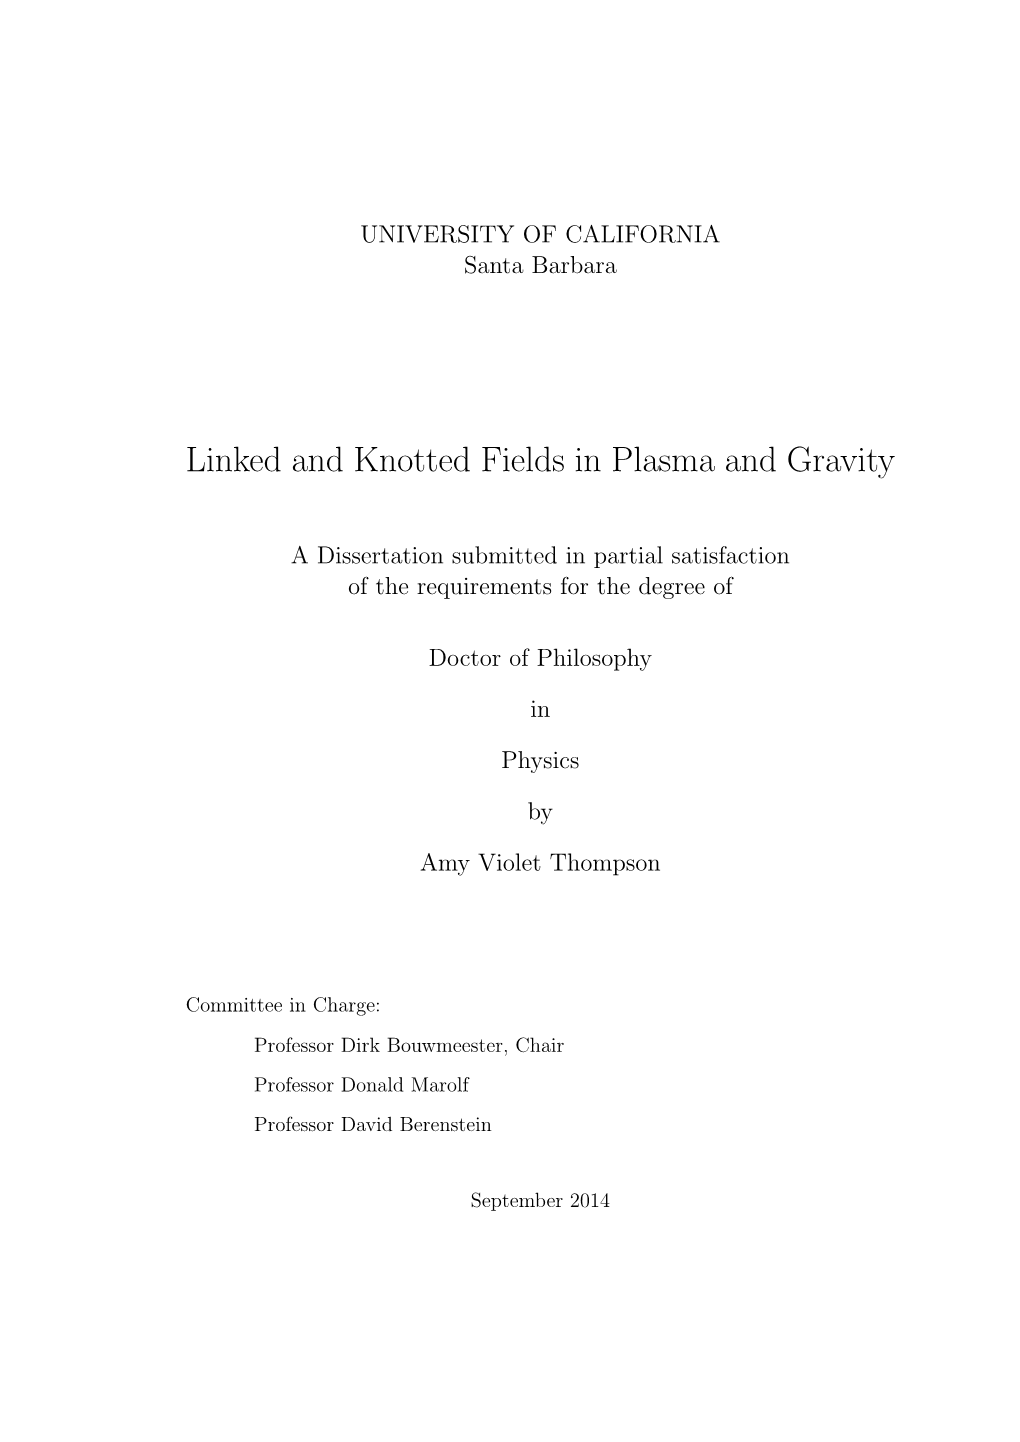 Linked and Knotted Fields in Plasma and Gravity